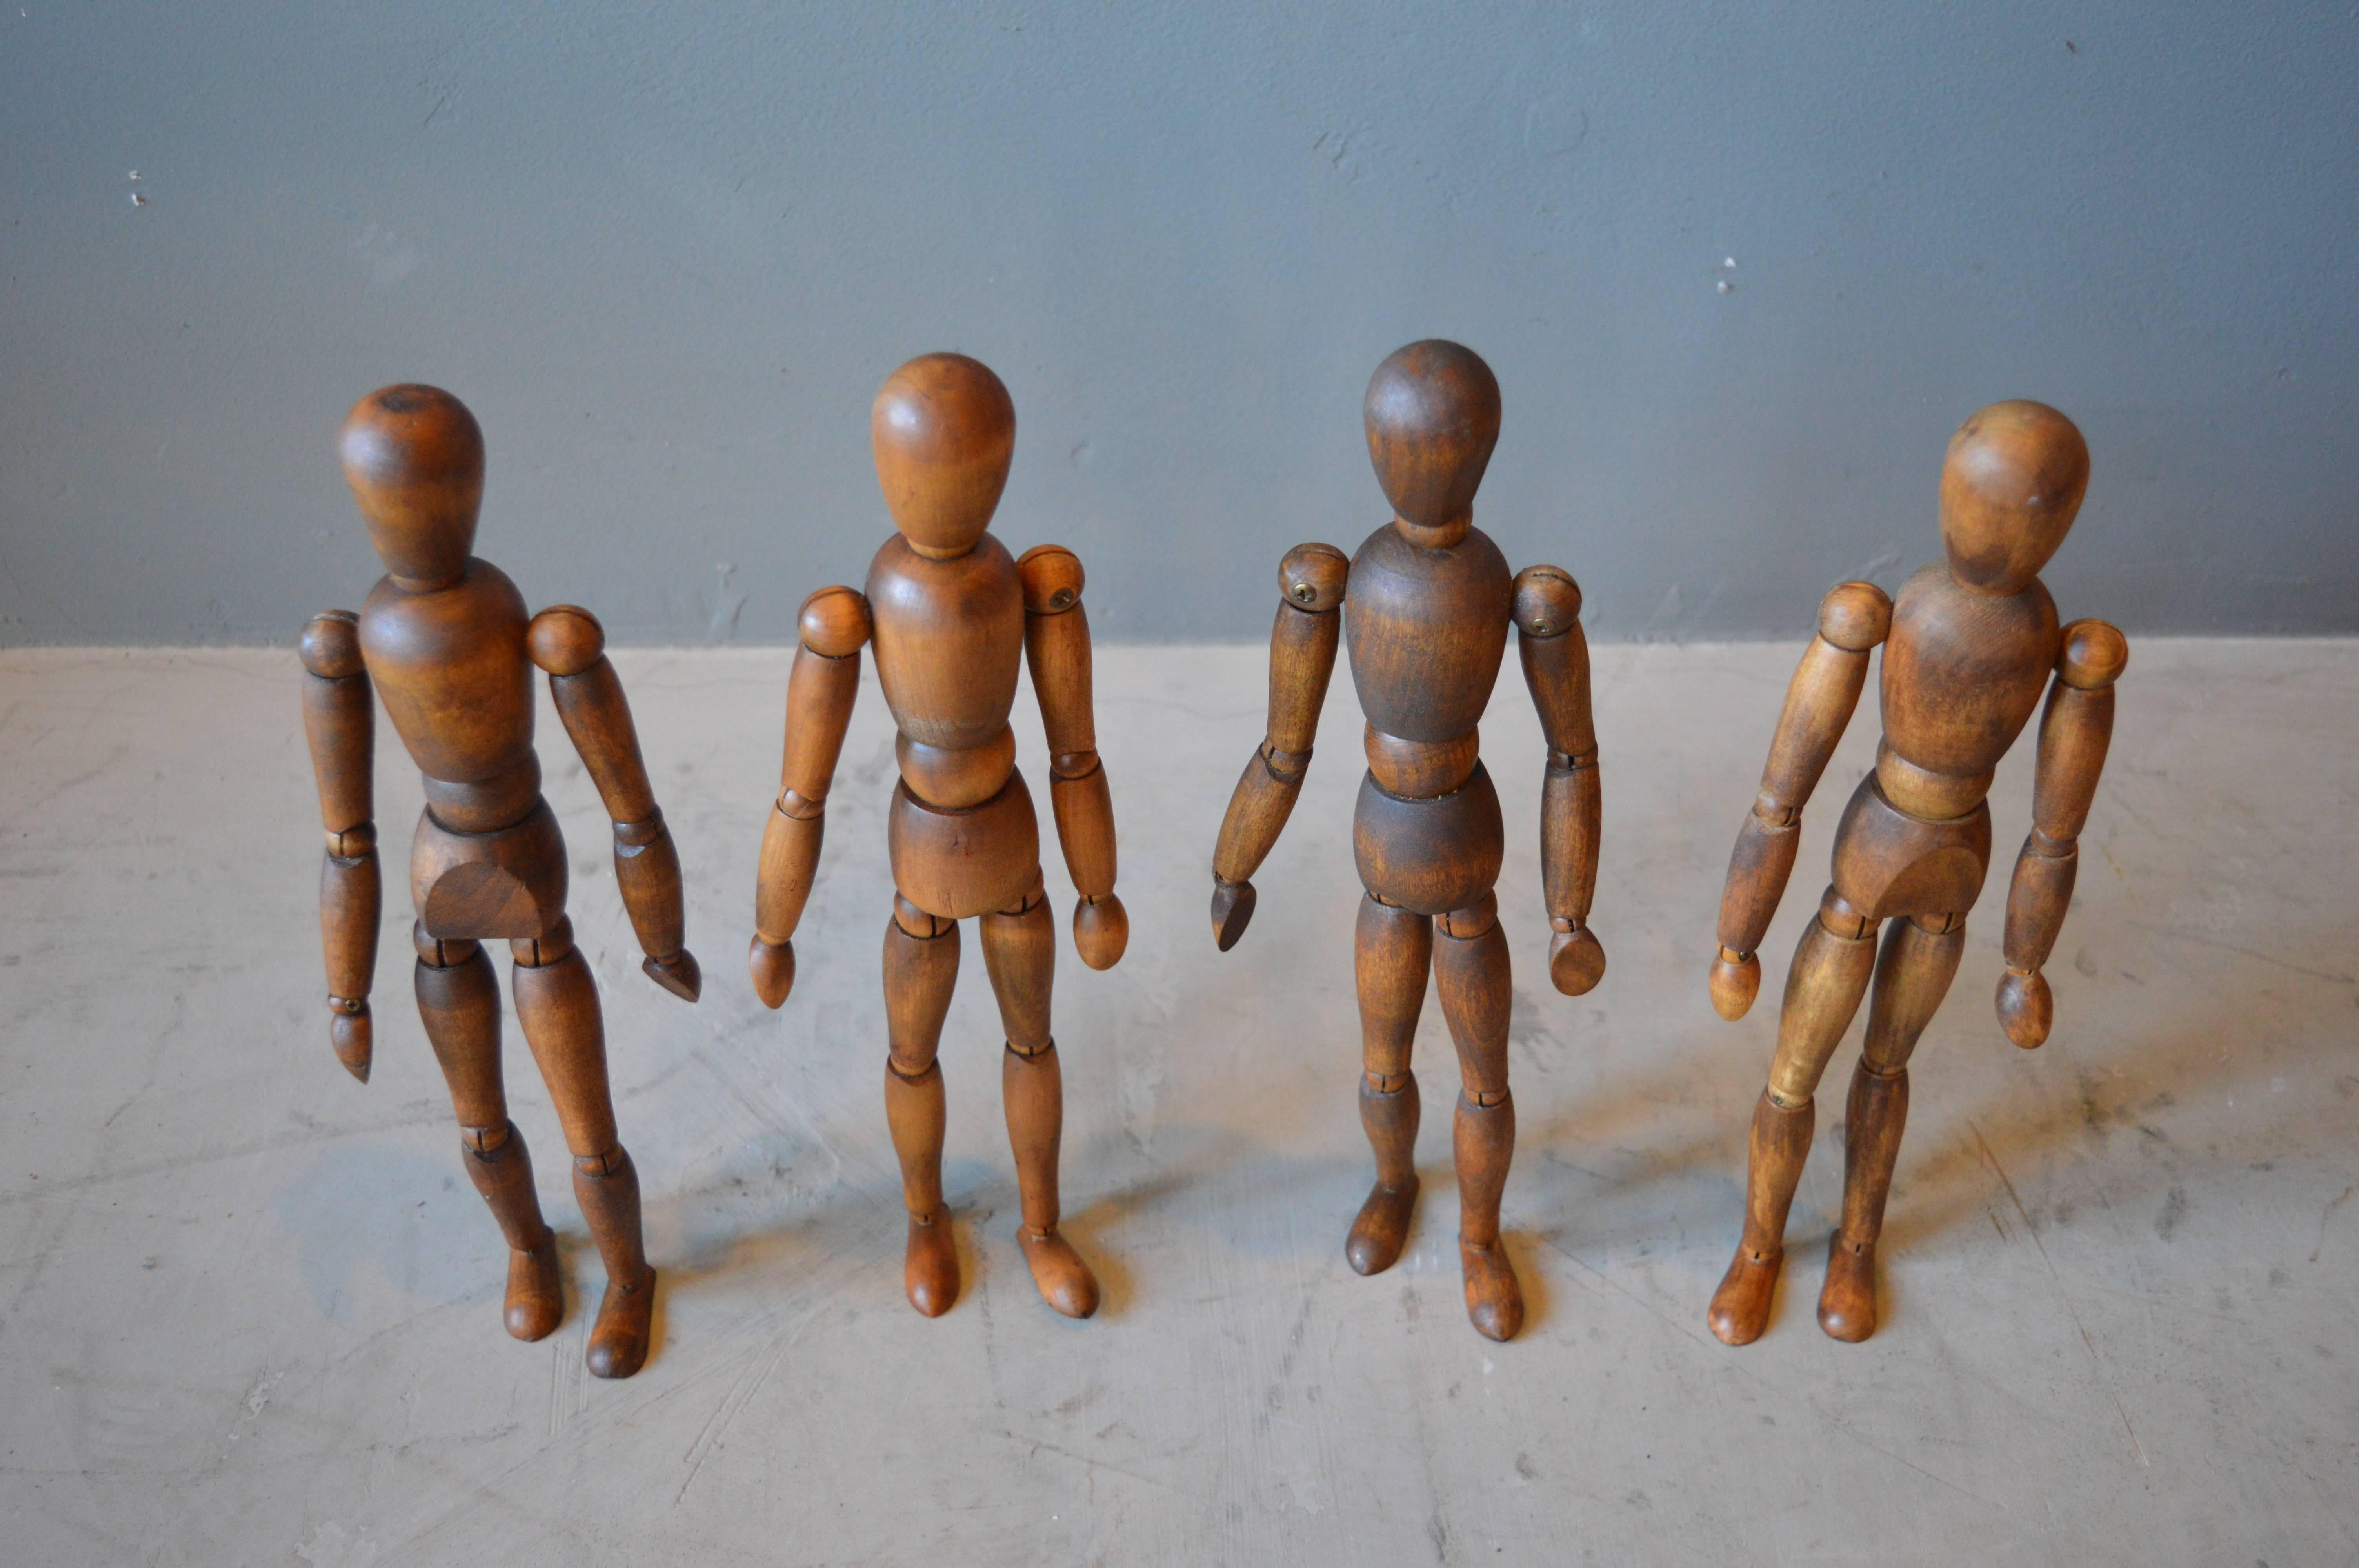 Fantastic set of four vintage wood articulating artist models. Fantastic sculpture. Great age and coloring to the wood. Excellent vintage condition.

Massive two foot tall artist model available in separate listing.